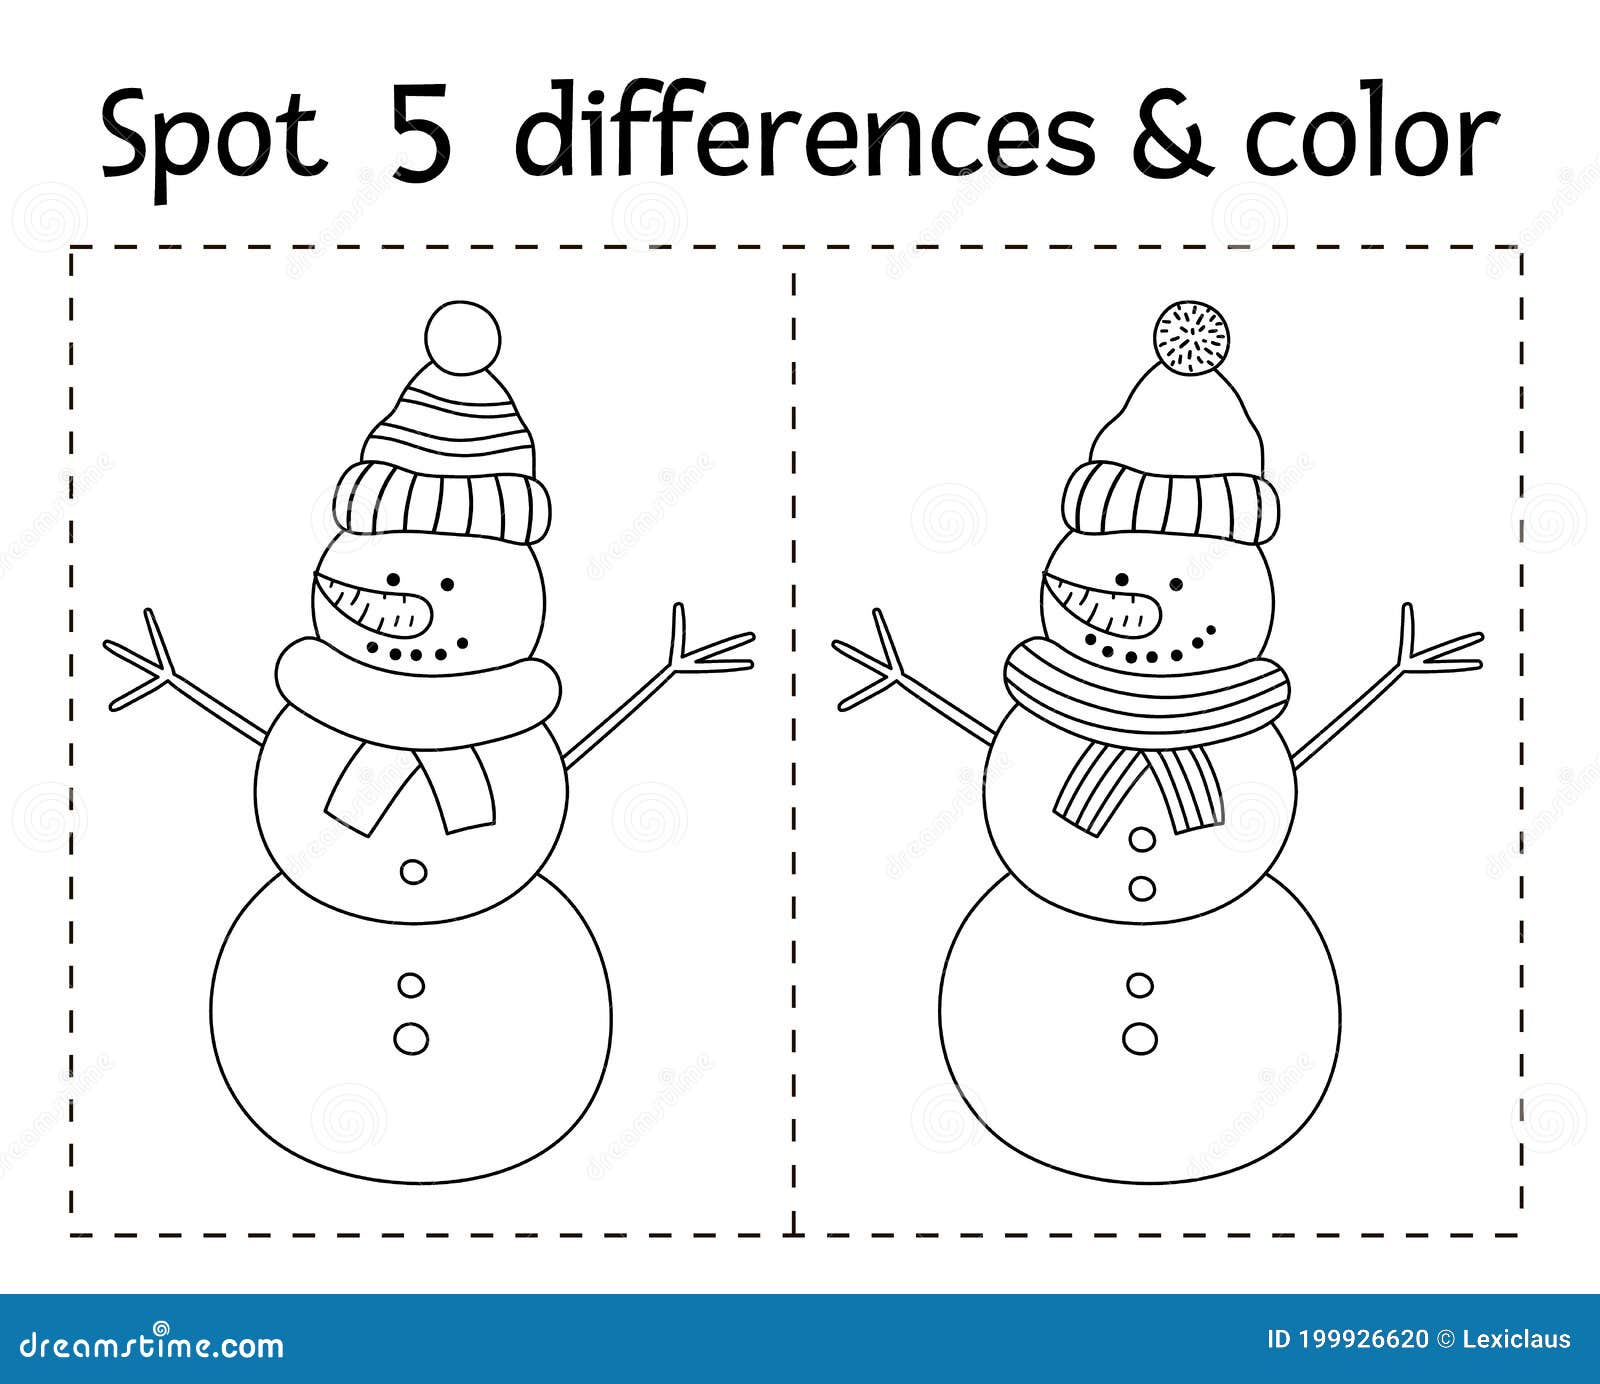 spot-the-difference-pictures-for-kids-find-the-differences-worksheets